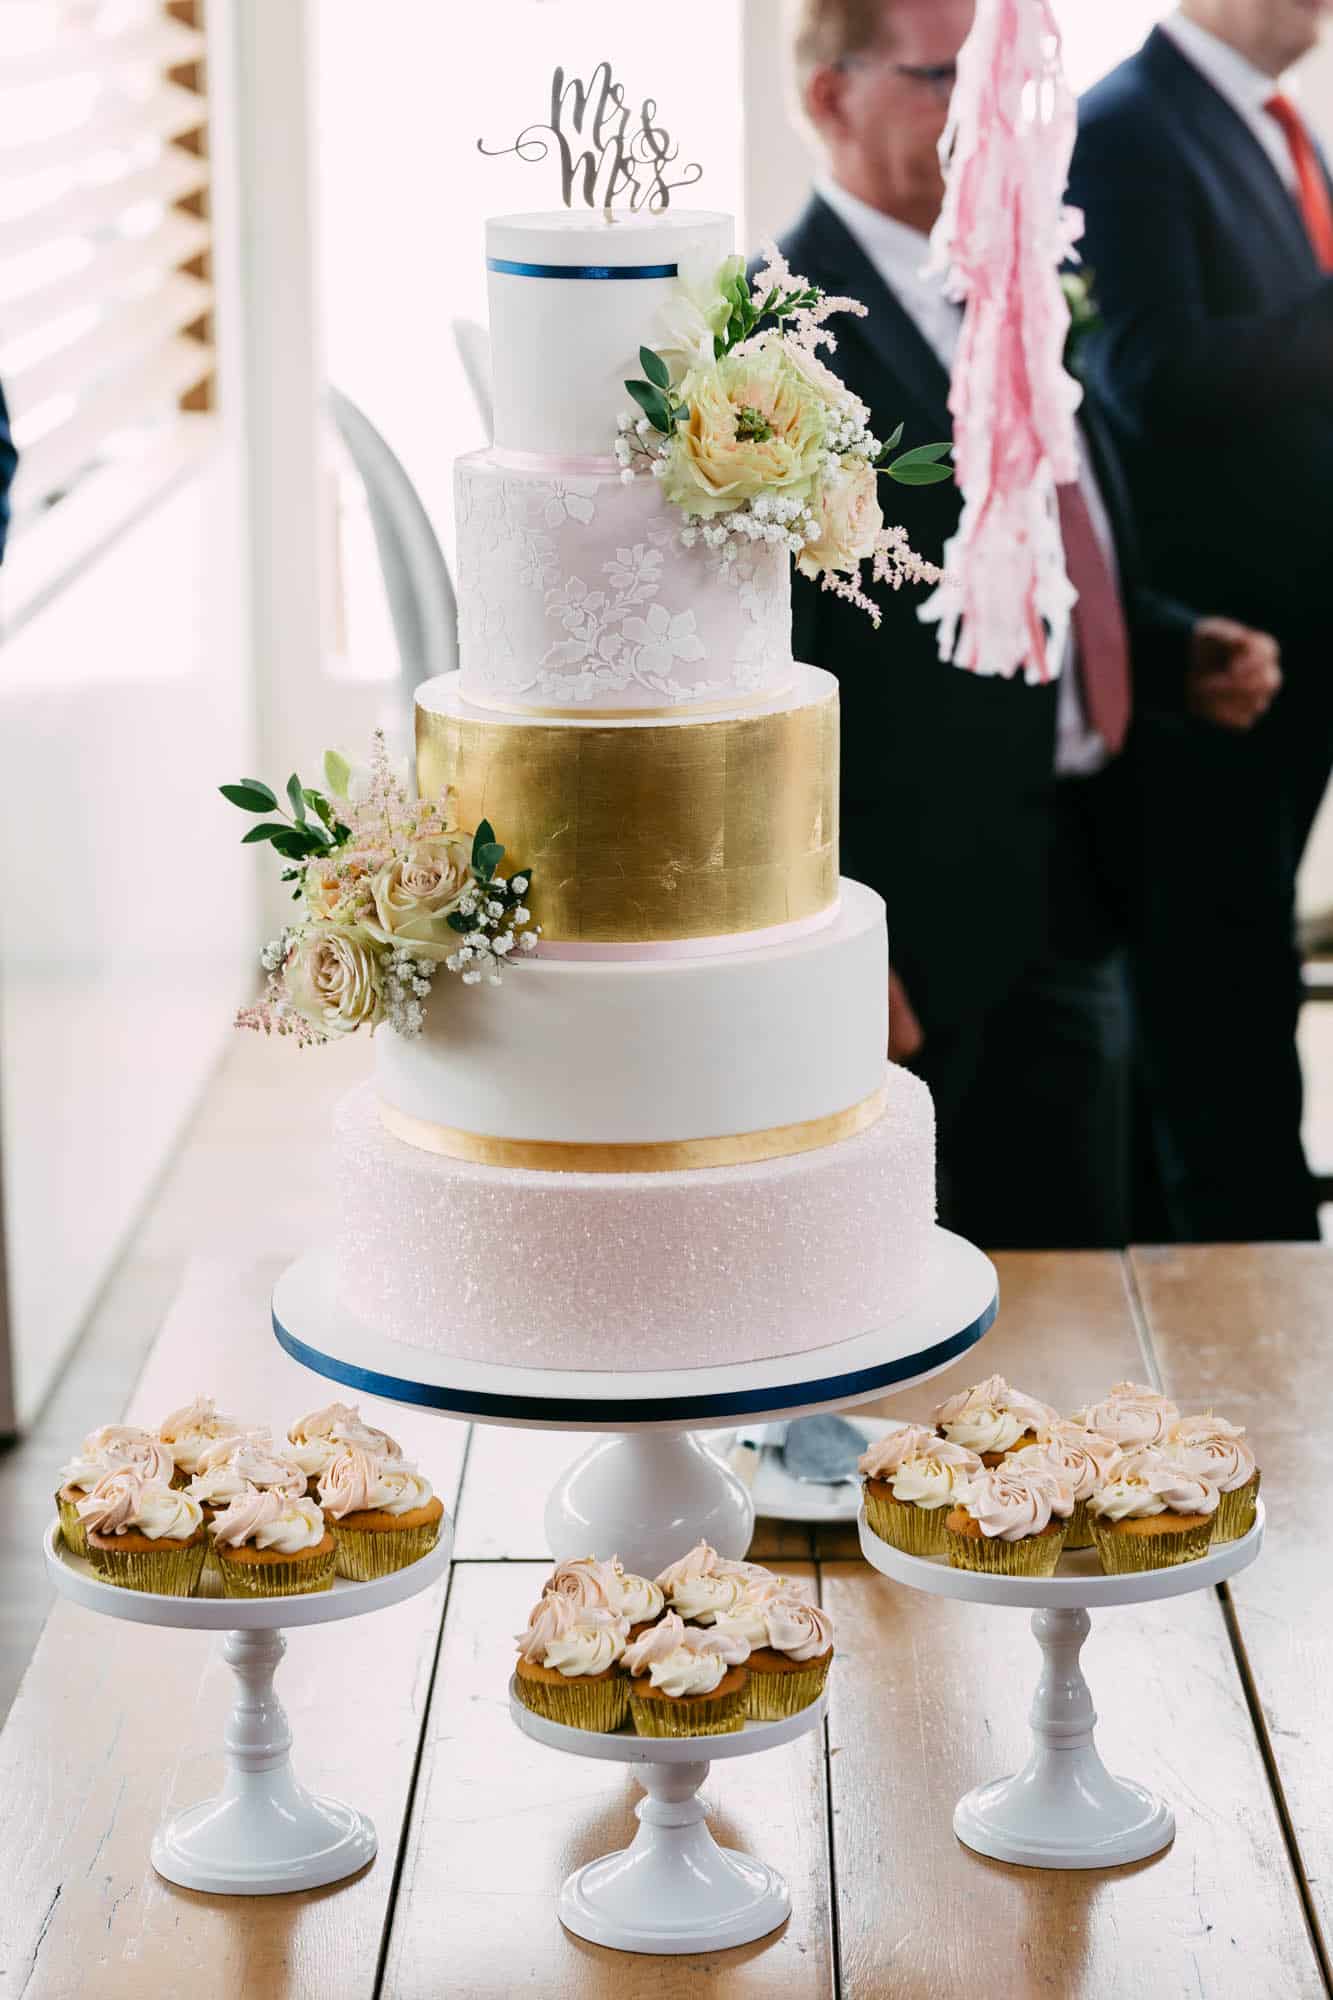 Wedding cakes sit on a table next to cupcakes.